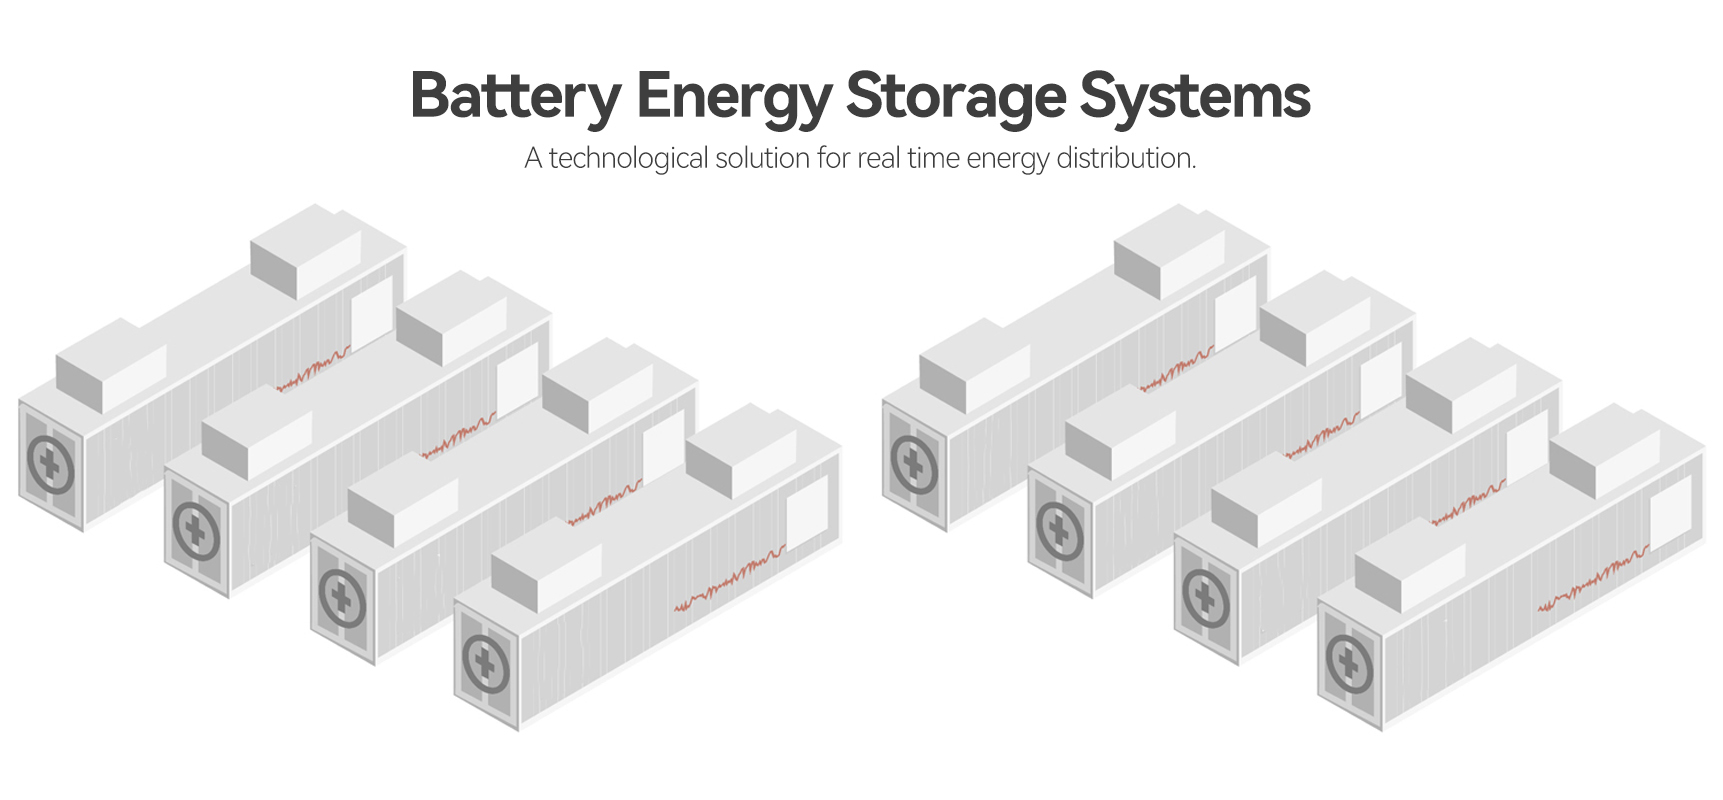 Battery Energy Storage Systems A Technological Solution For Real Time Energy Distribution 